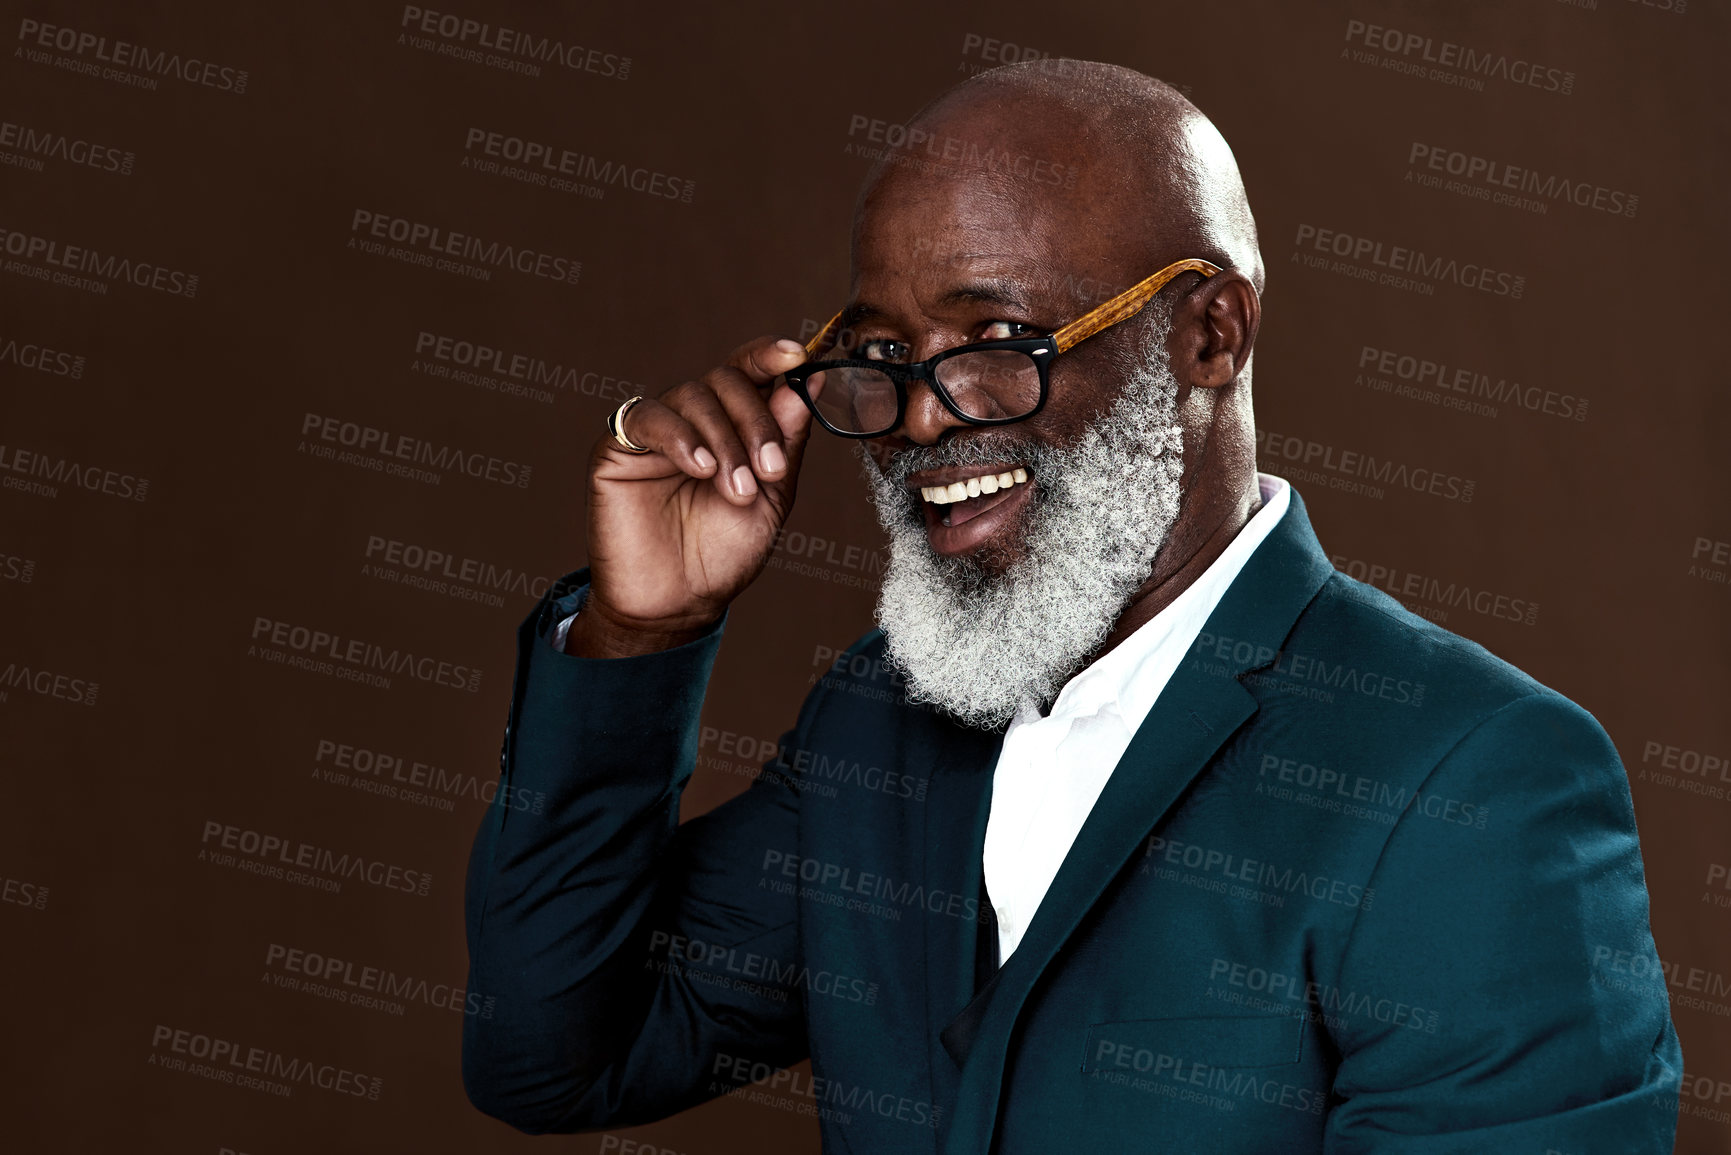 Buy stock photo Studio shot of a mature businessman posing against a brown background